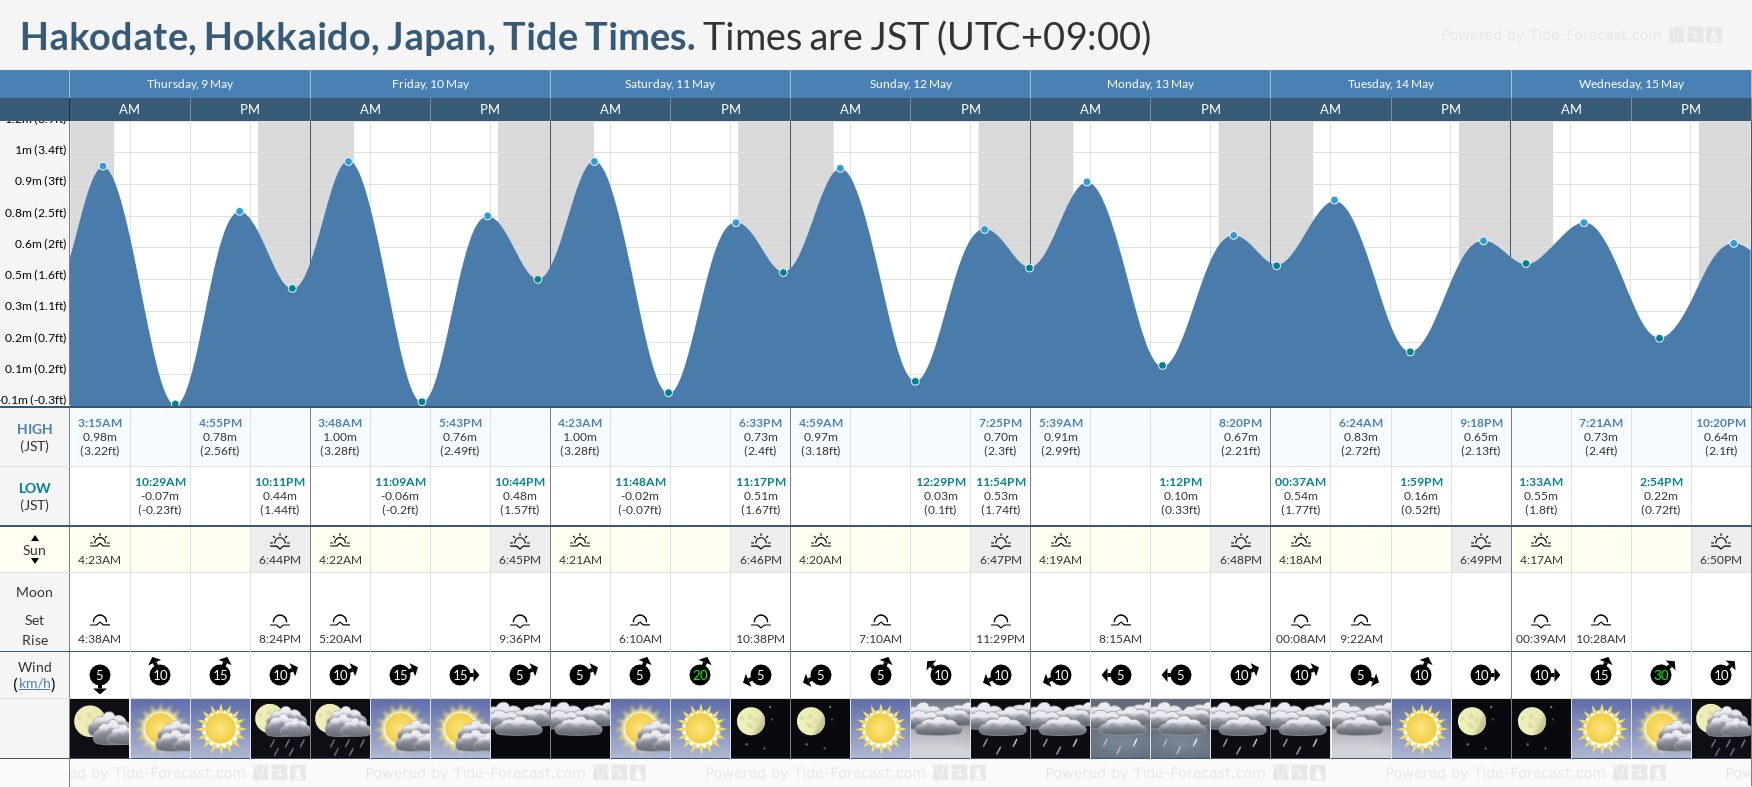 Hakodate, Hokkaido, Japan Tide Chart including high and low tide times for the next 7 days